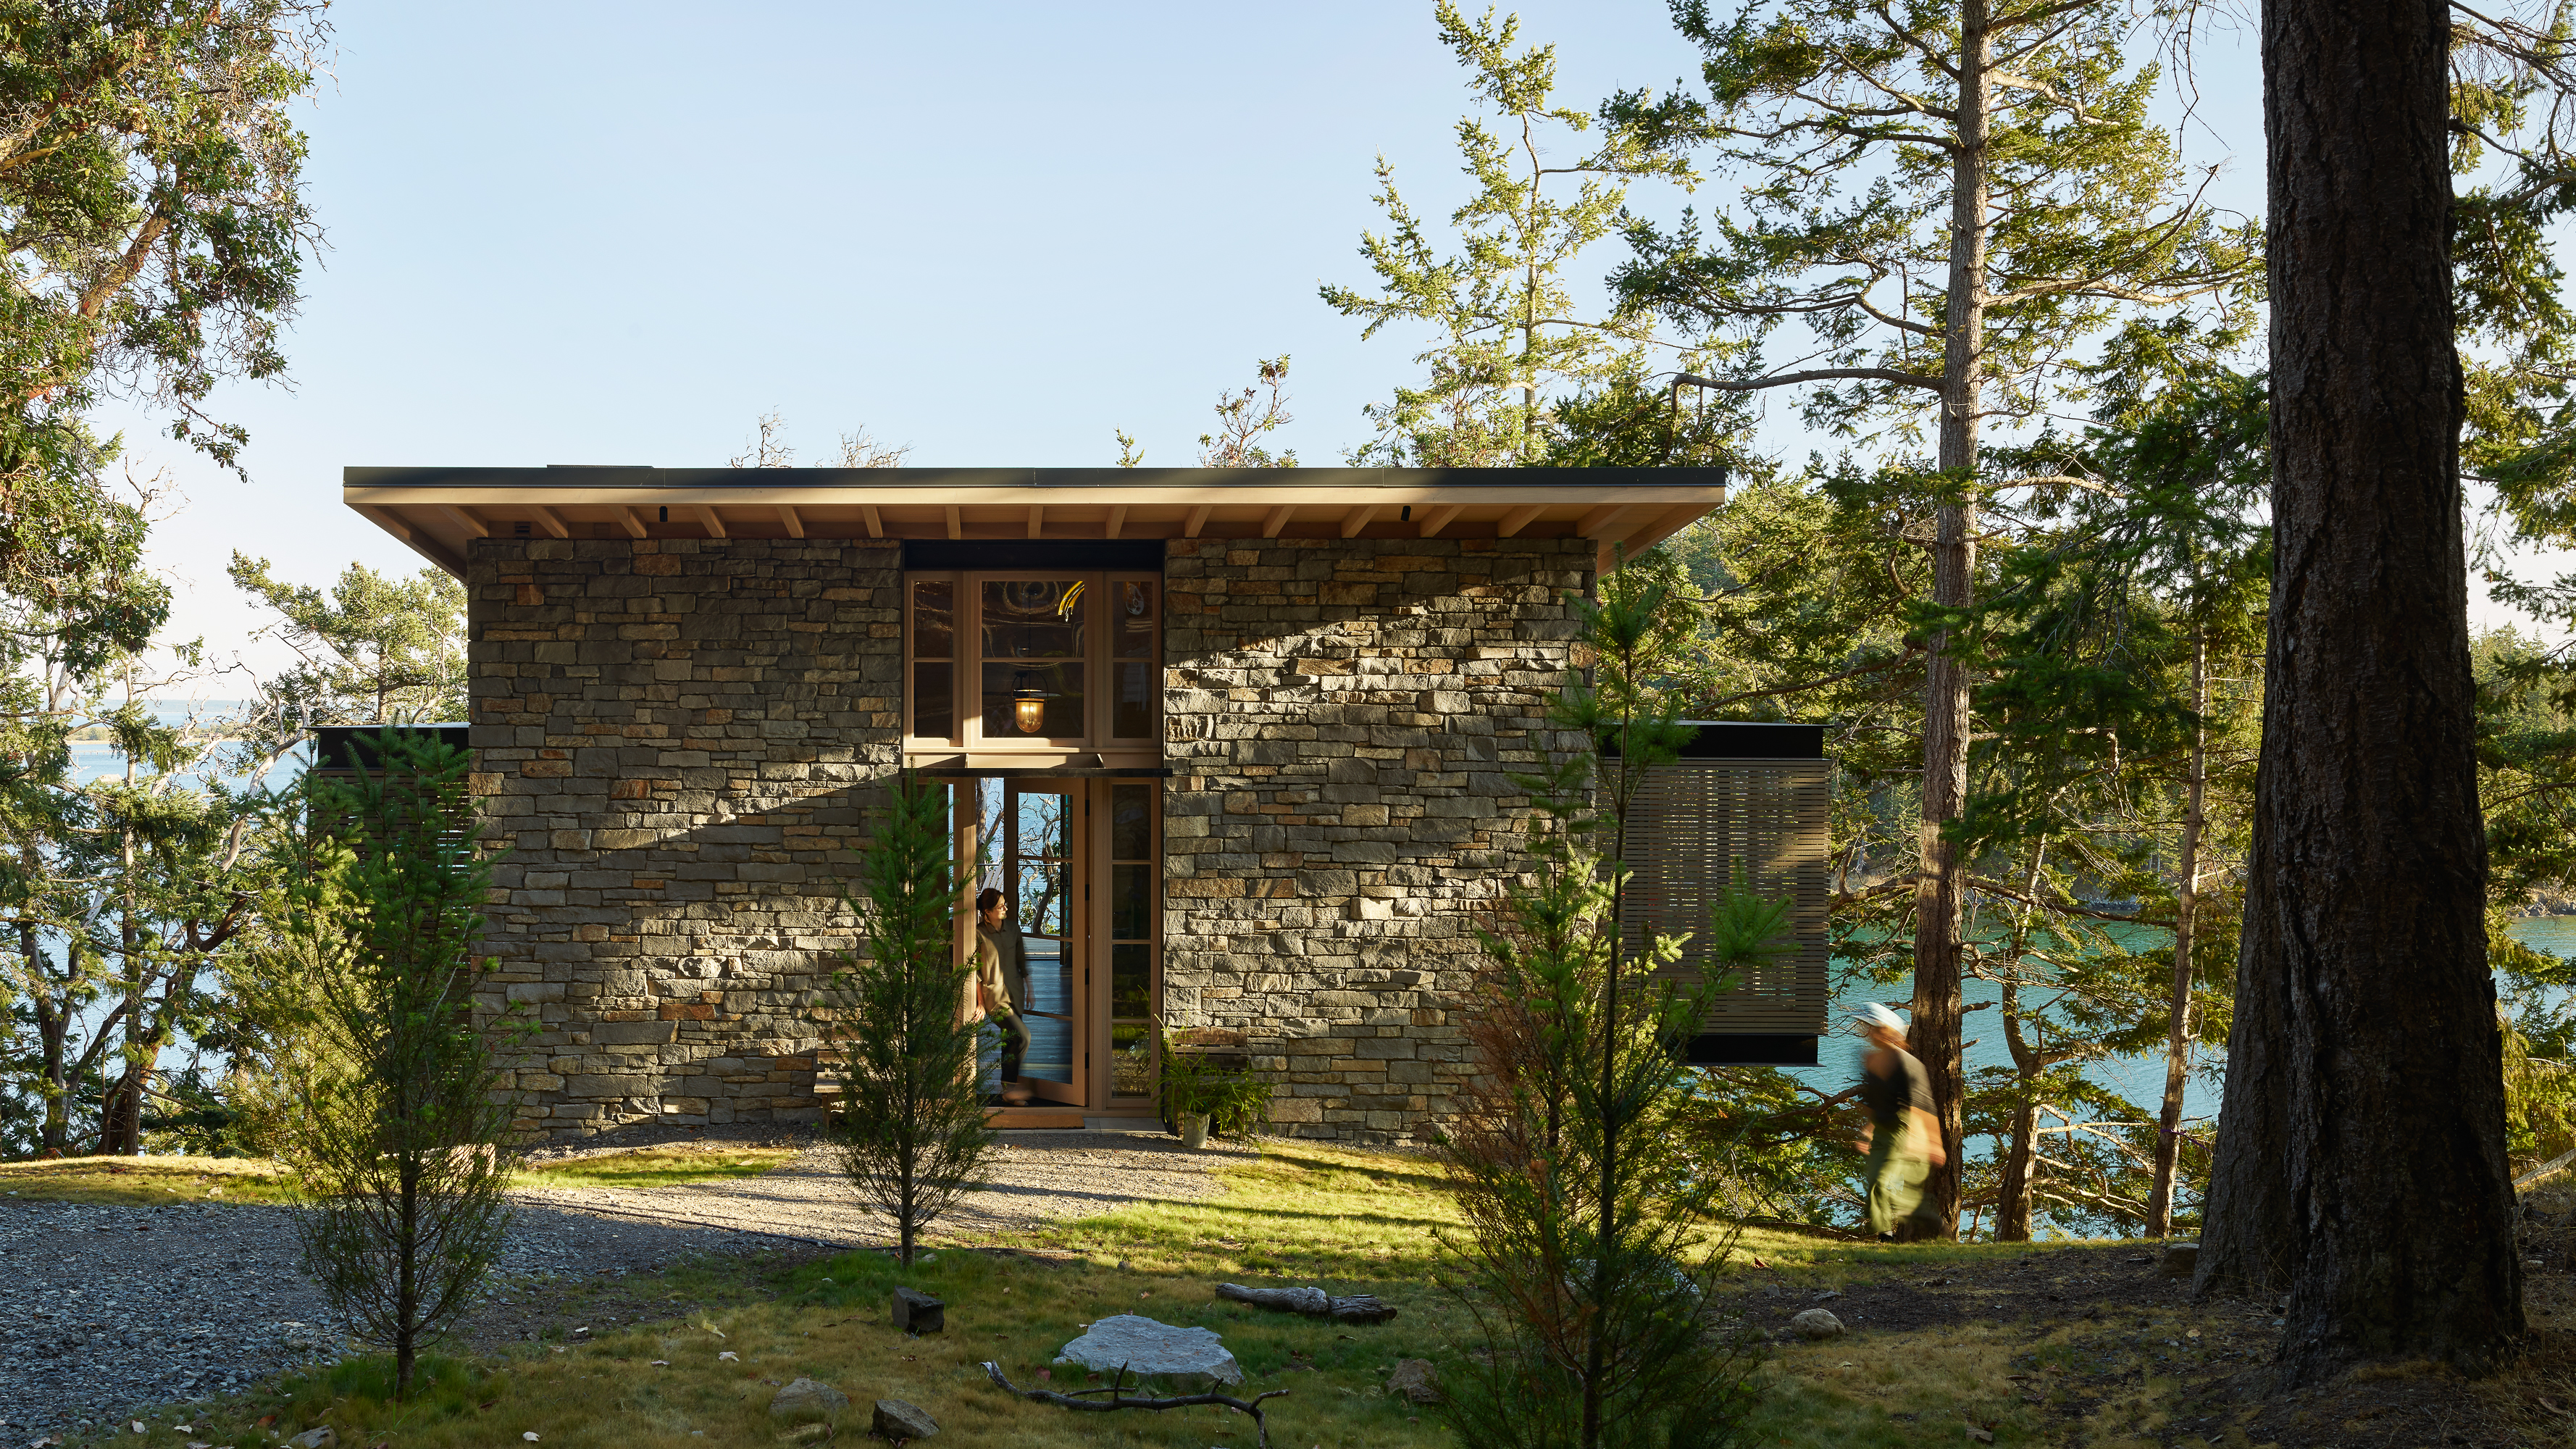 The guest house, a stone tower with innovative design, offers unique accommodations and breathtaking views of Puget Sound, blending seamlessly with its surroundings.